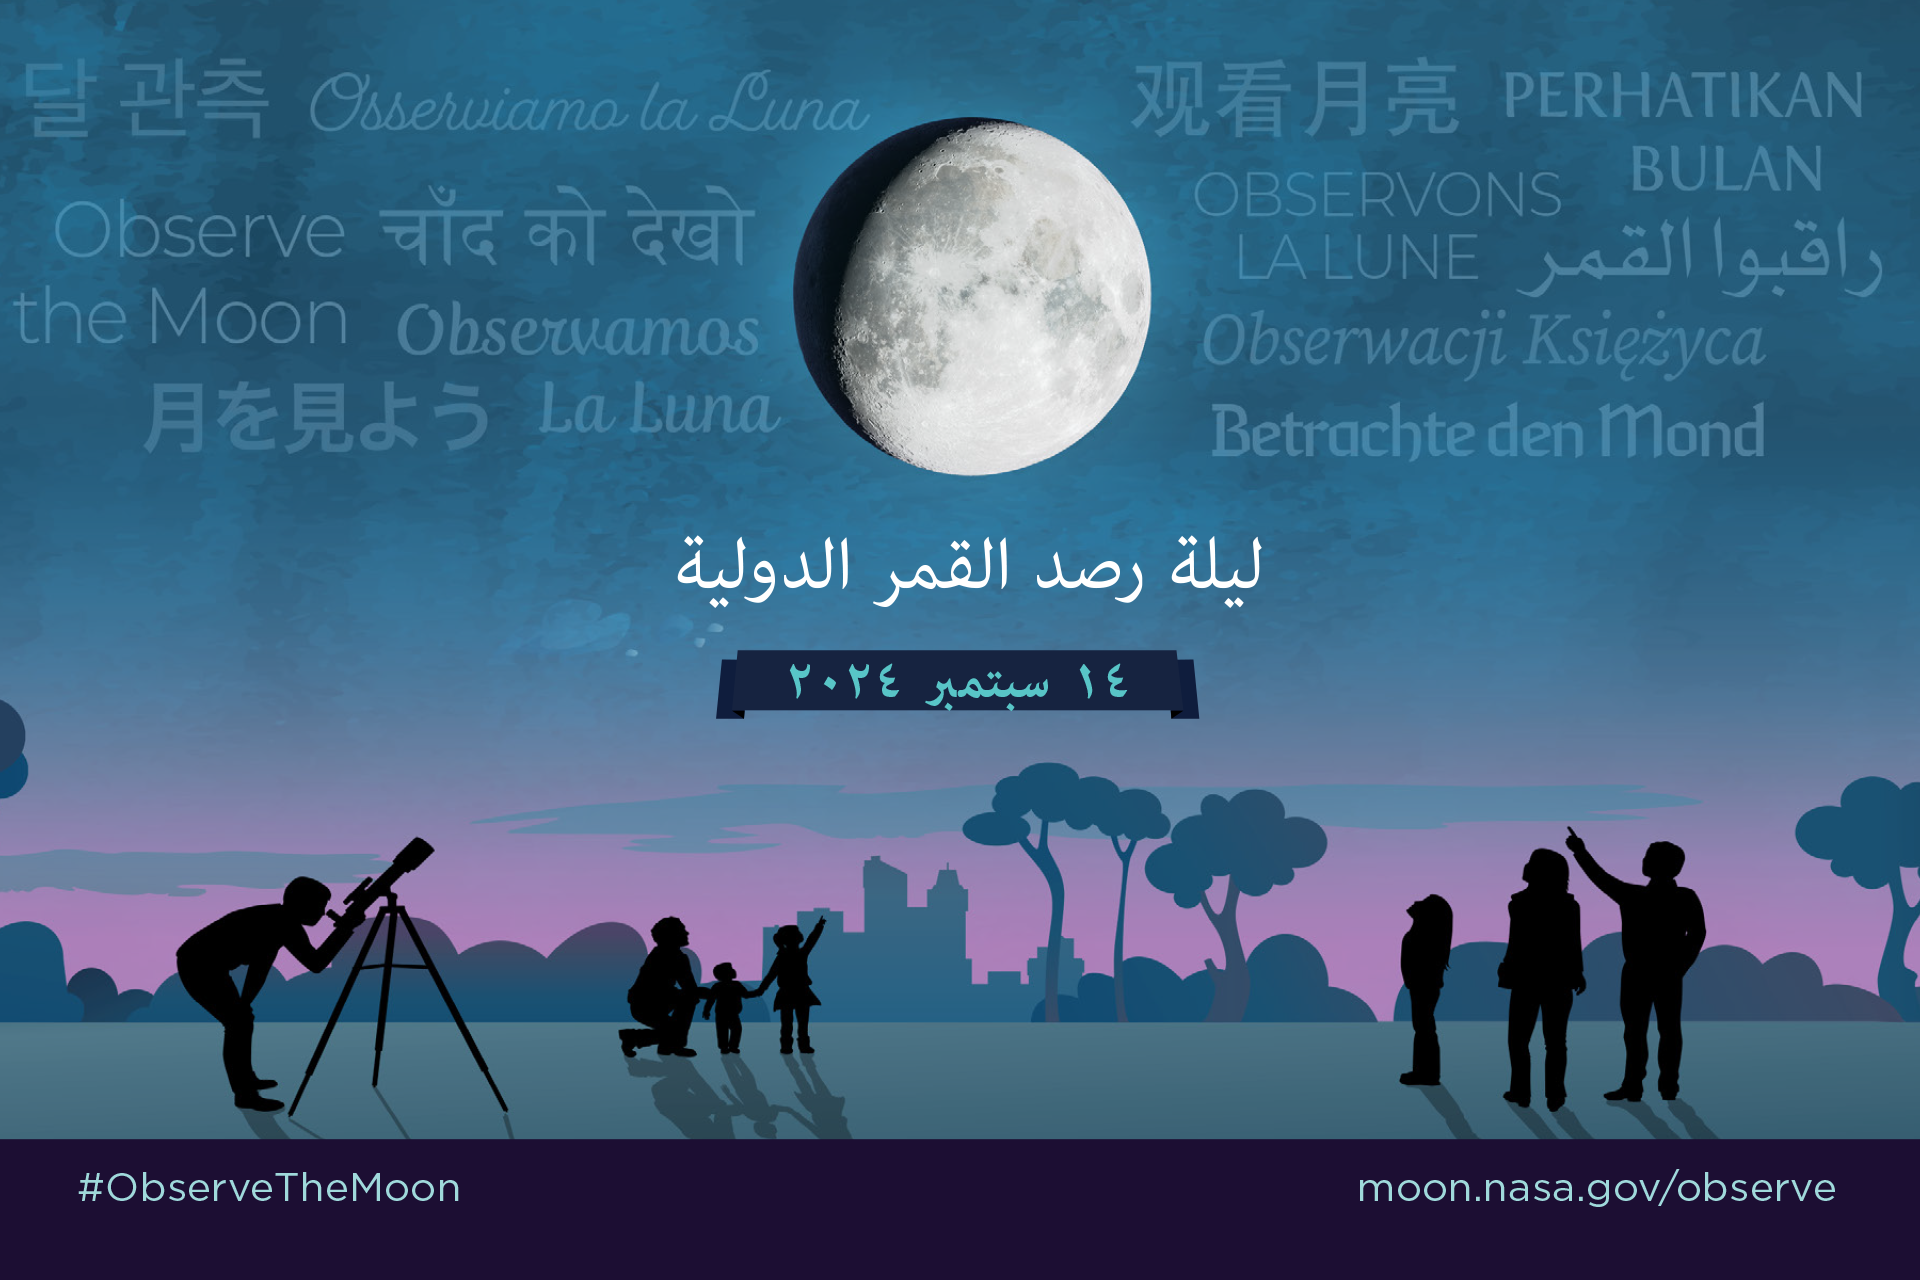 Stylized illustration of silhouettes of people looking up at a large Moon in the night sky.